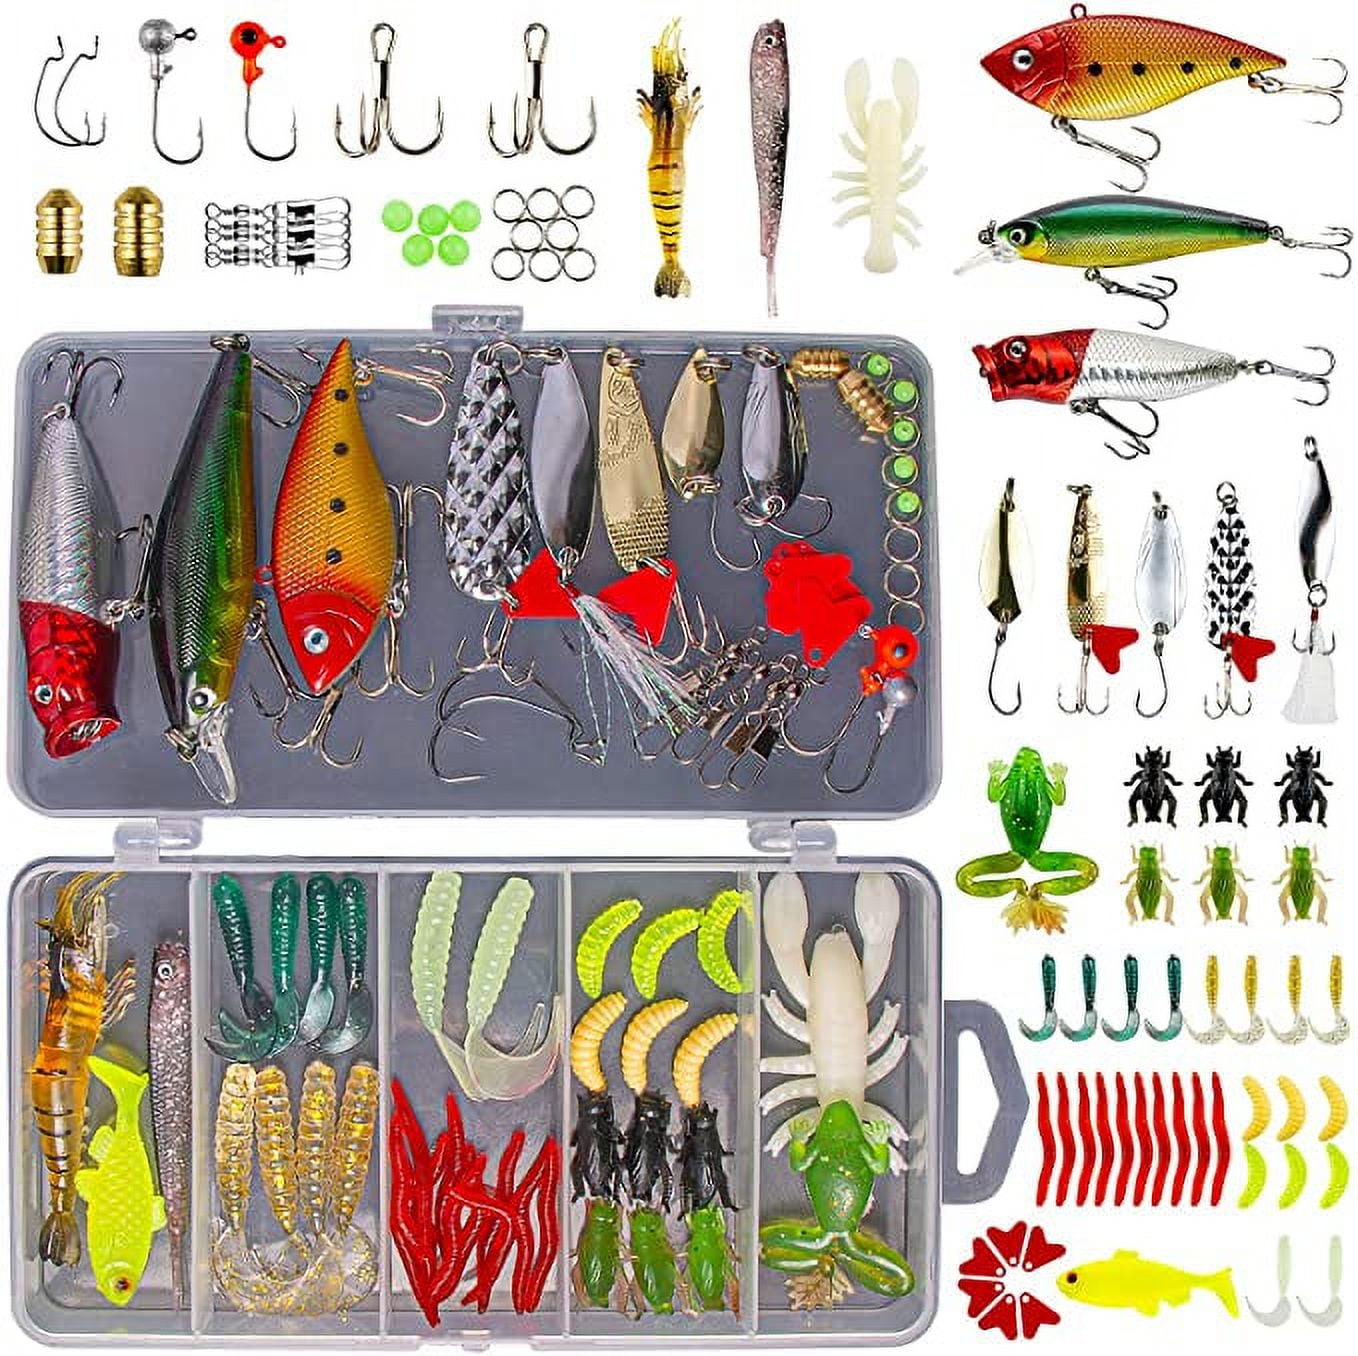 Fishing Tackle Box with Wacky Rig Tool,Saltwater and Freshwater Lures  Fishing Gear Kit Including Fishing Accessories,Bobbers Float etc,Fishing  Equipment for Bass,Trout, Salmon . 